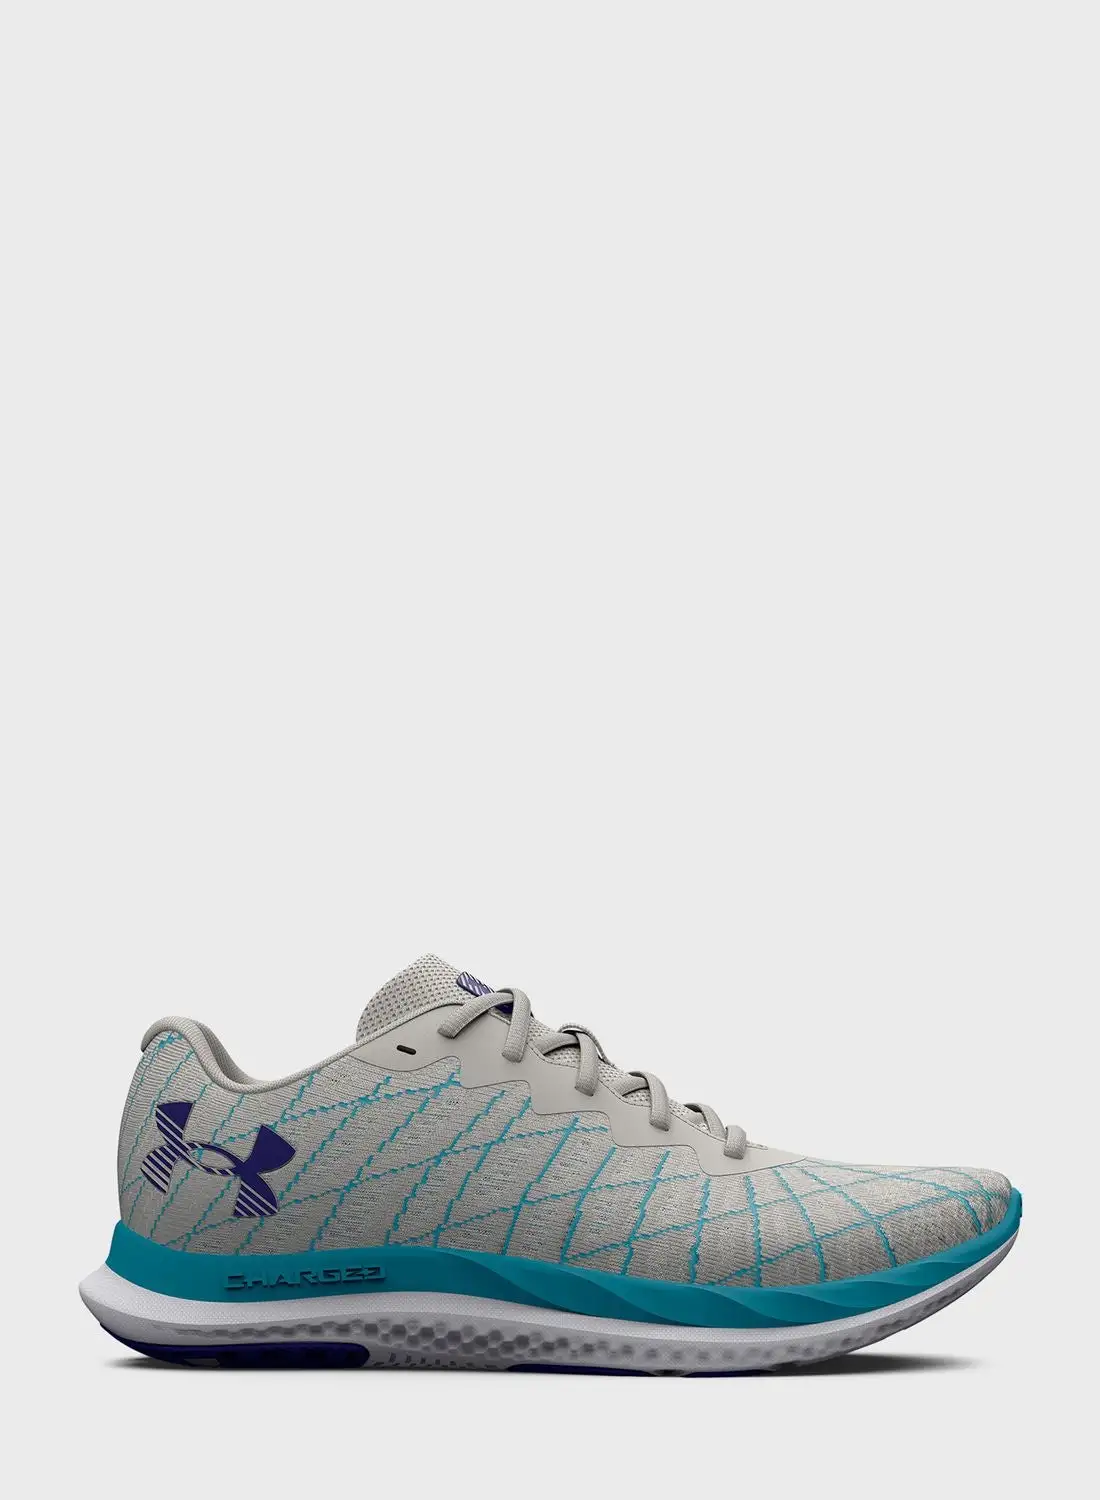 UNDER ARMOUR Charged Breeze 2